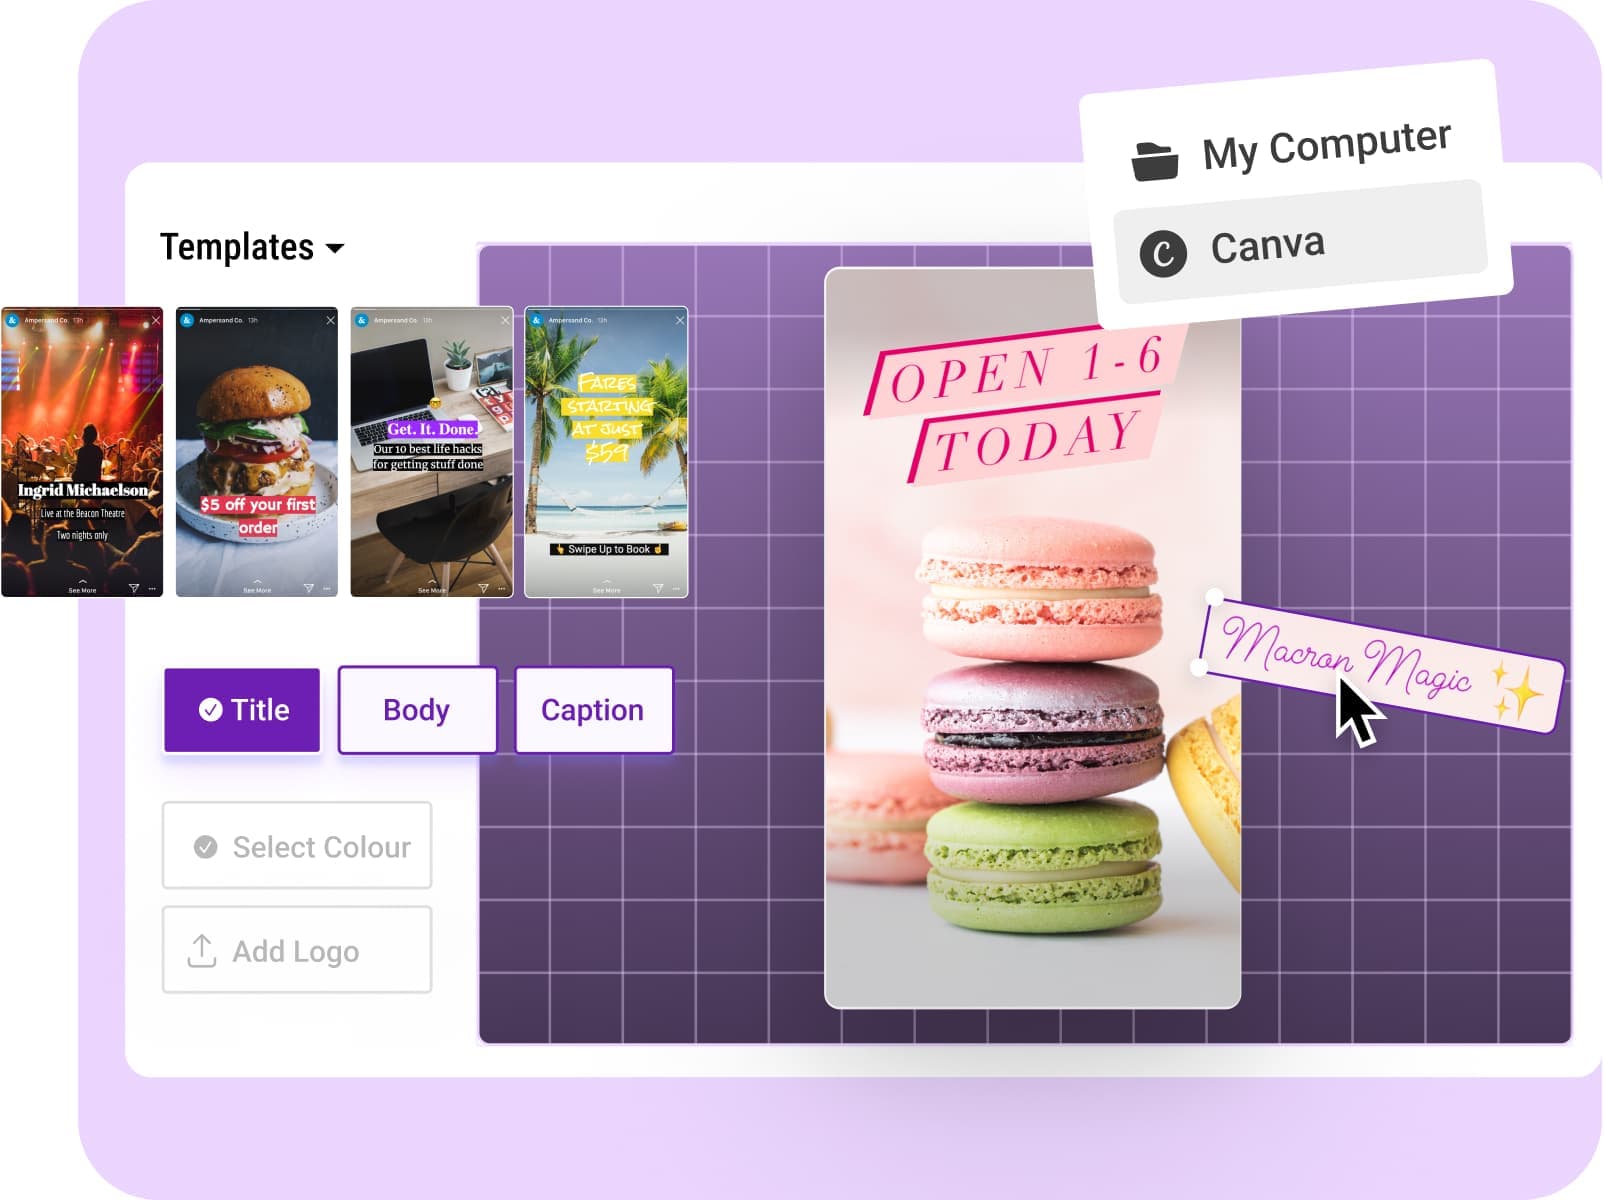 Buffer Instagram templates can allow you to upload images from your computer or Canva and customize the title, body, and caption.